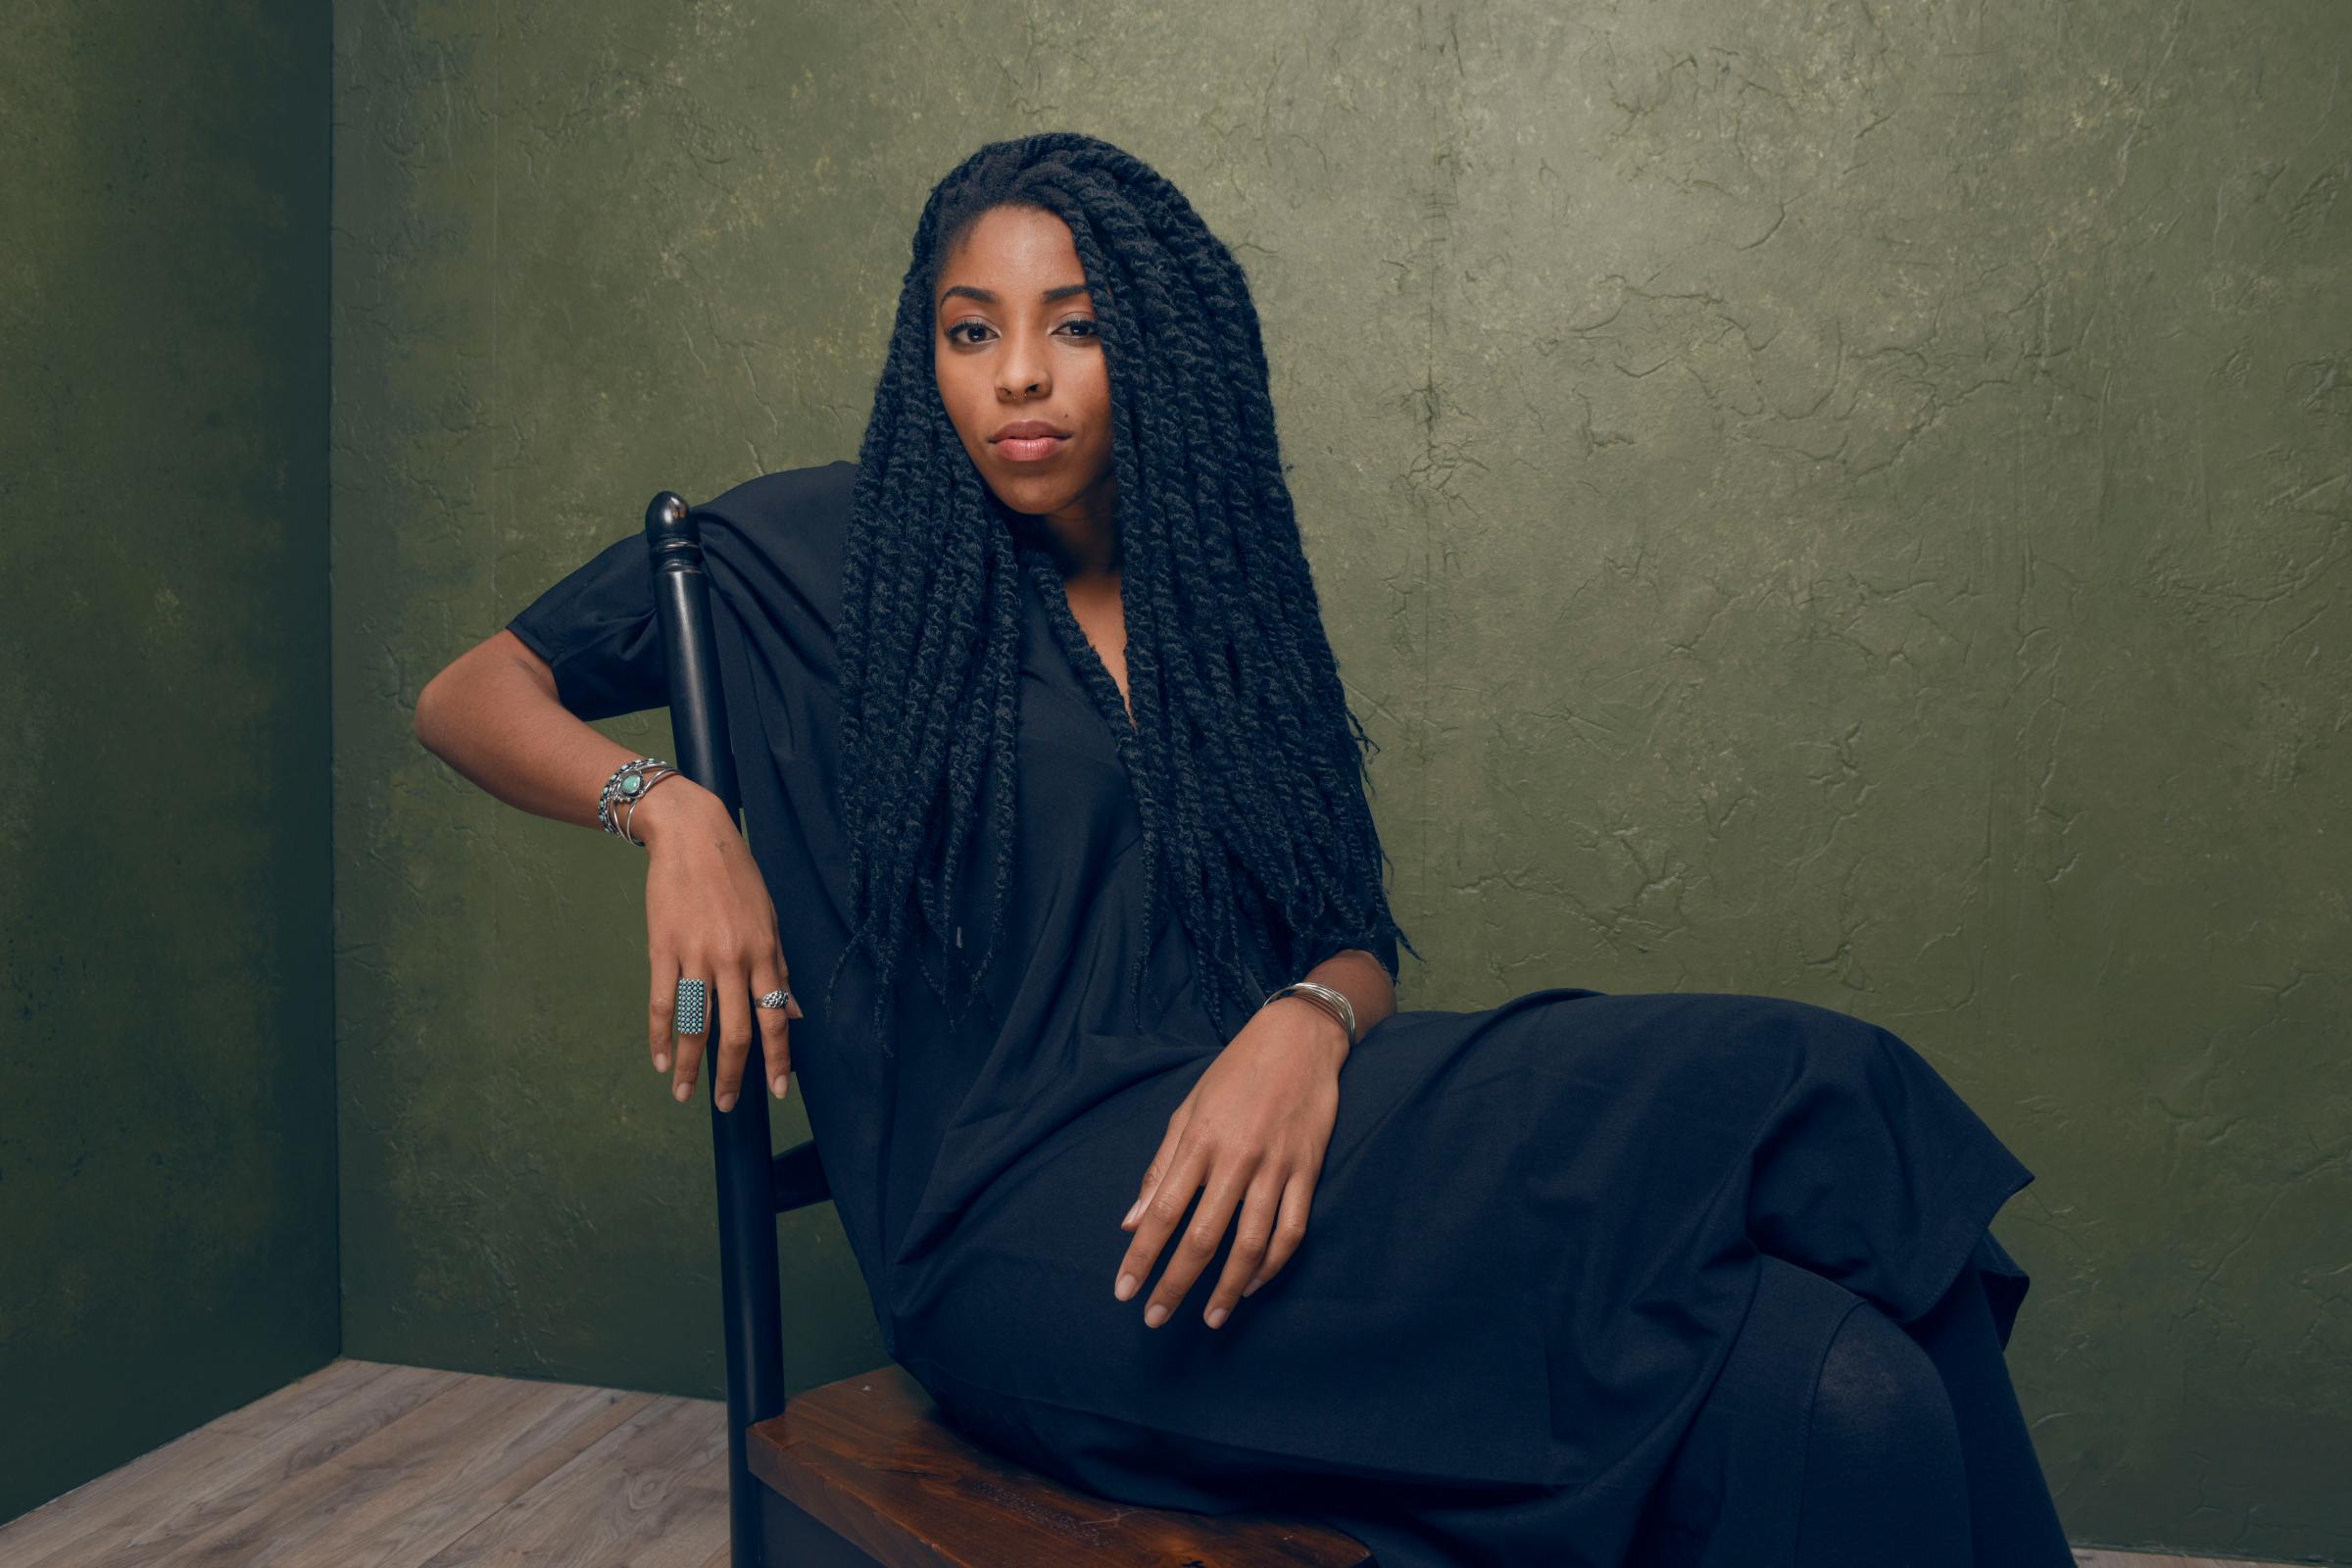 Actress Jessica Williams of "People, Places, Things" poses for a portrait at the Village at the Lift Presented by McDonald's McCafe during the 2015 Sundance Film Festival in Park City, Utah on Jan. 26, 2015.